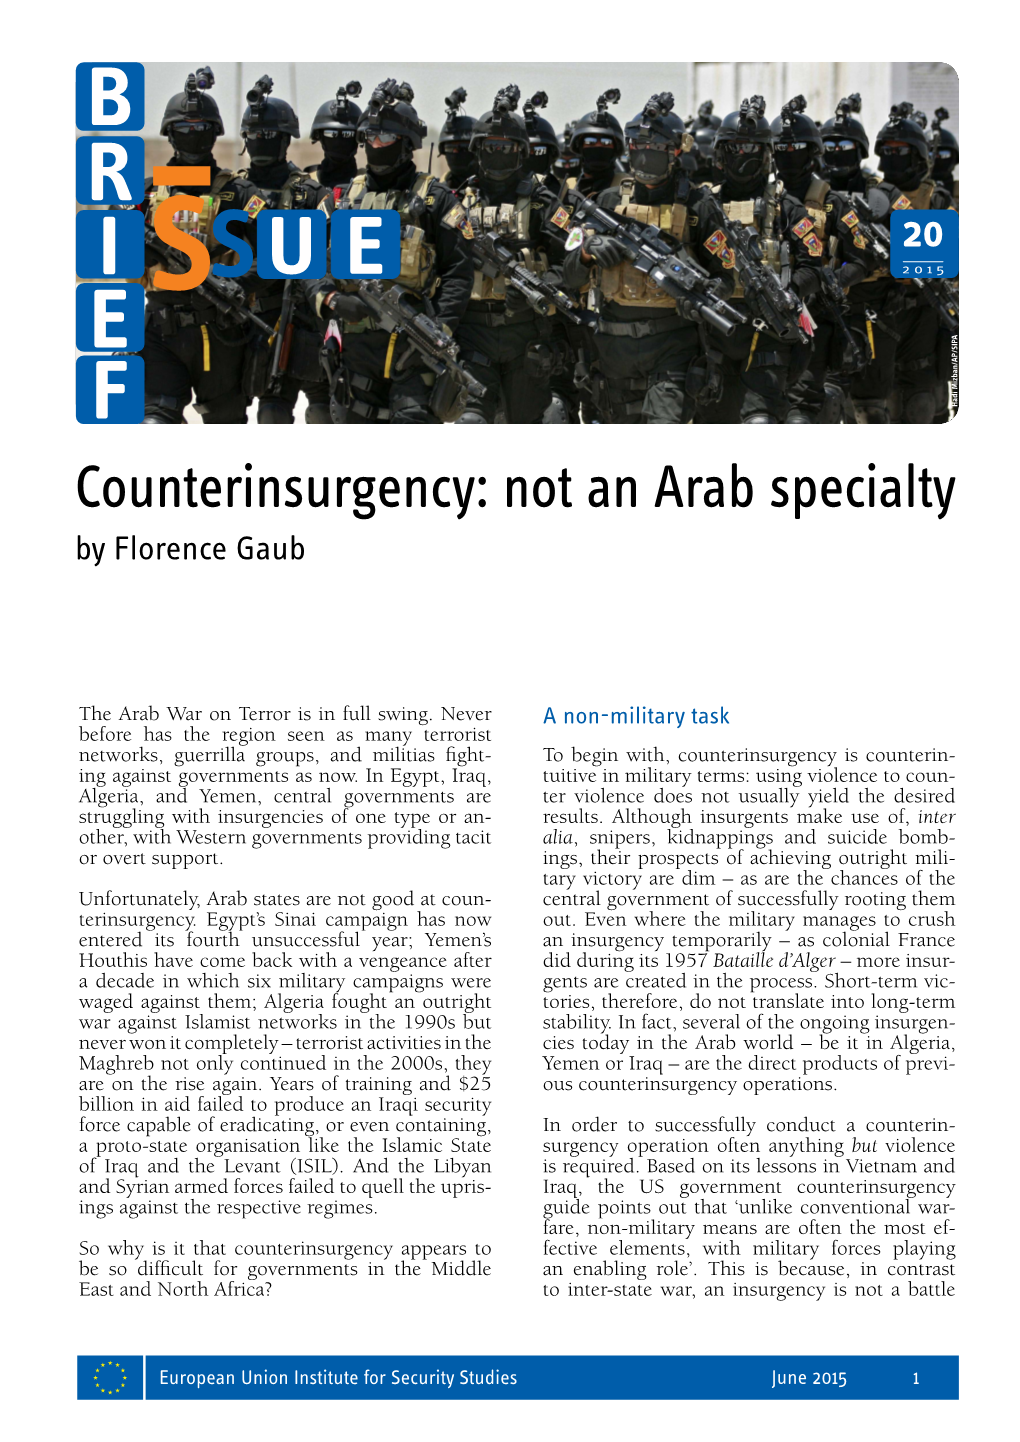 Counterinsurgency: Not an Arab Specialty by Florence Gaub